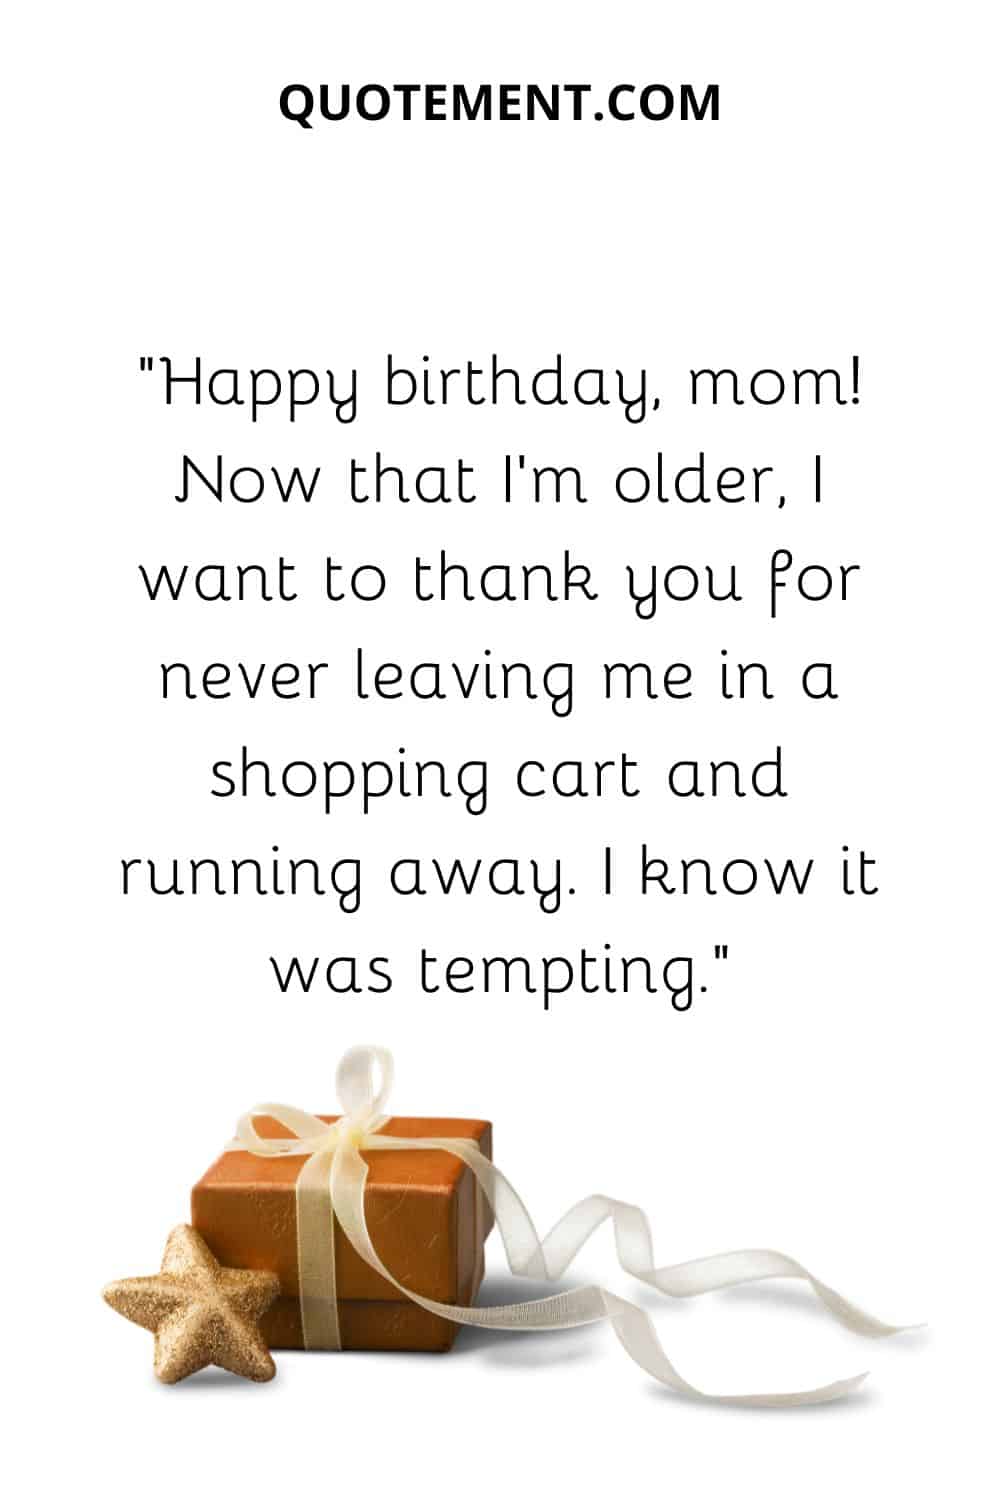 Happy birthday, mom! Now that I’m older, I want to thank you for never leaving me in a shopping cart and running away